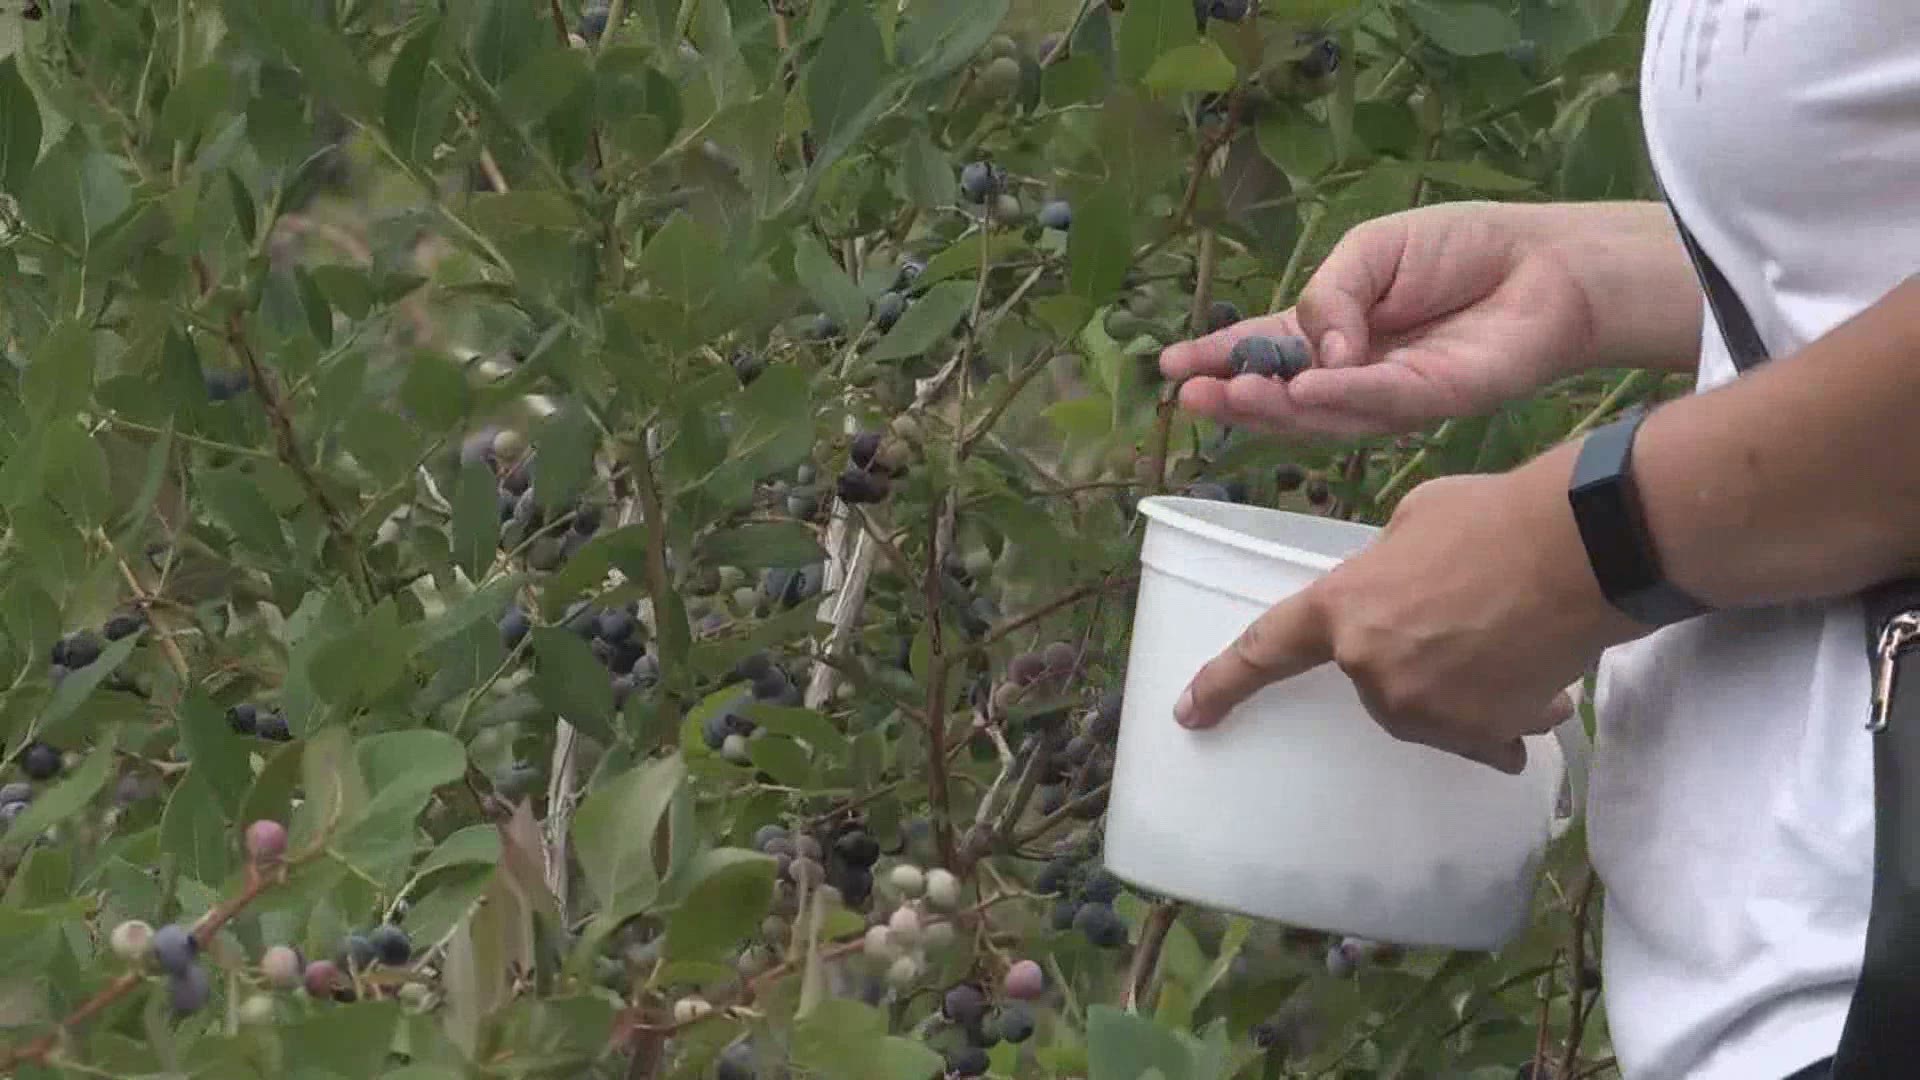 Blueberry season is underway and one farm in Limerick says it saw double the number of visitors on opening day than in the last two years combined.